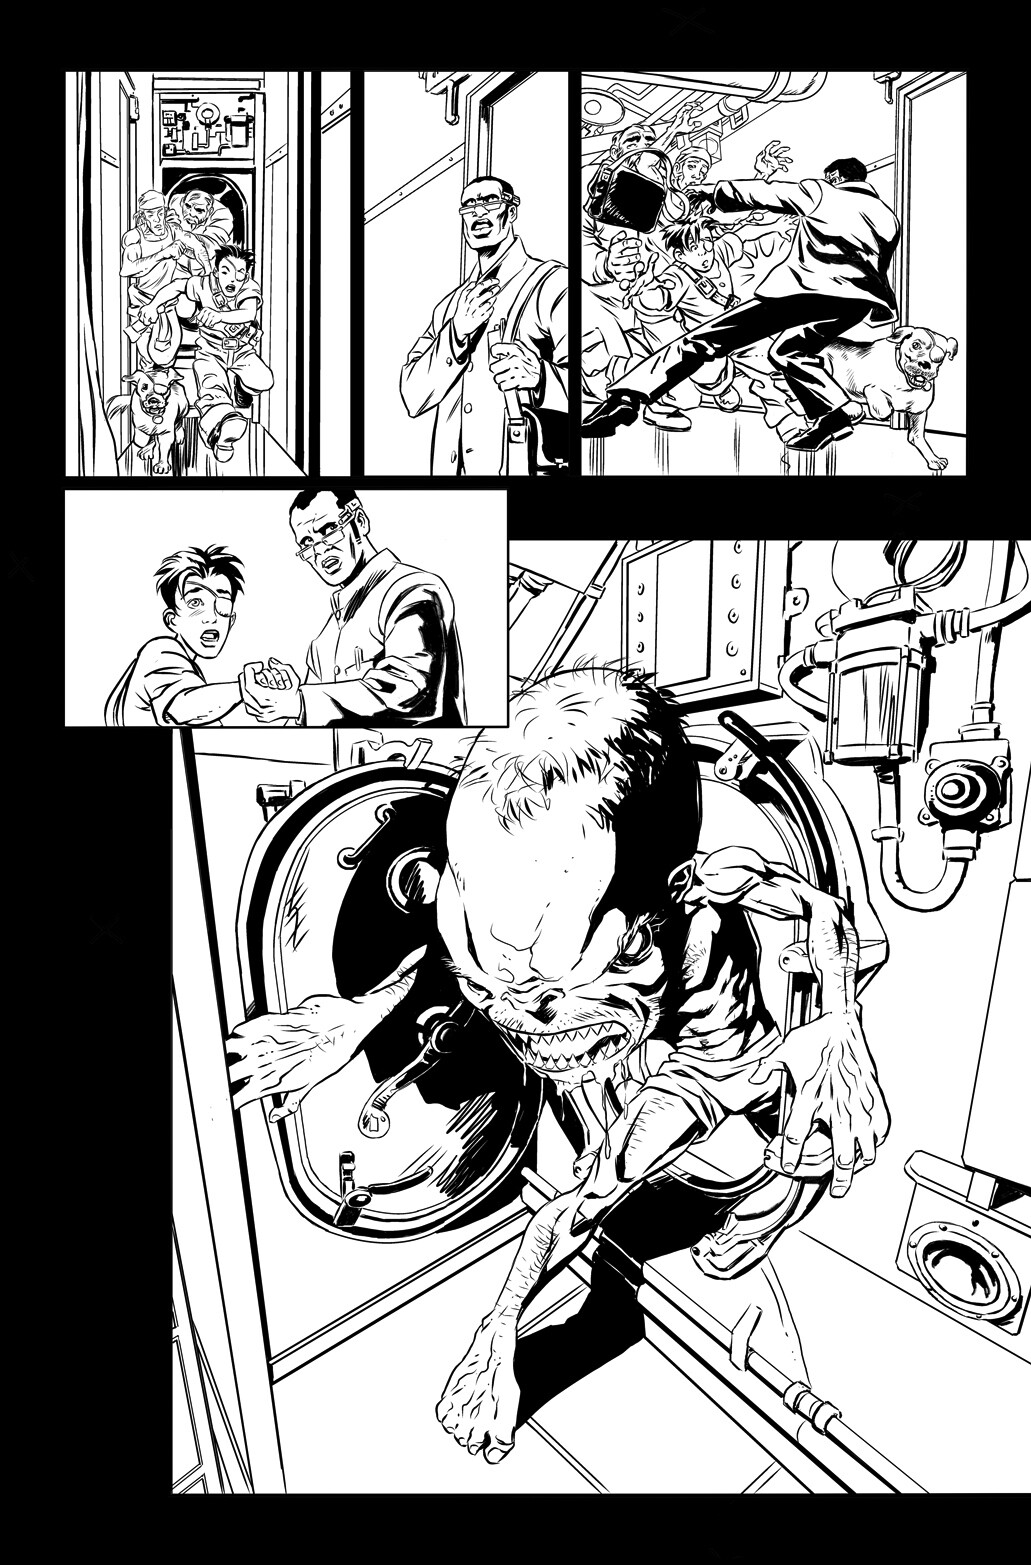 Deep Dive Daredevils, The Secret of the Beaufort Sea.
Page 10 inks